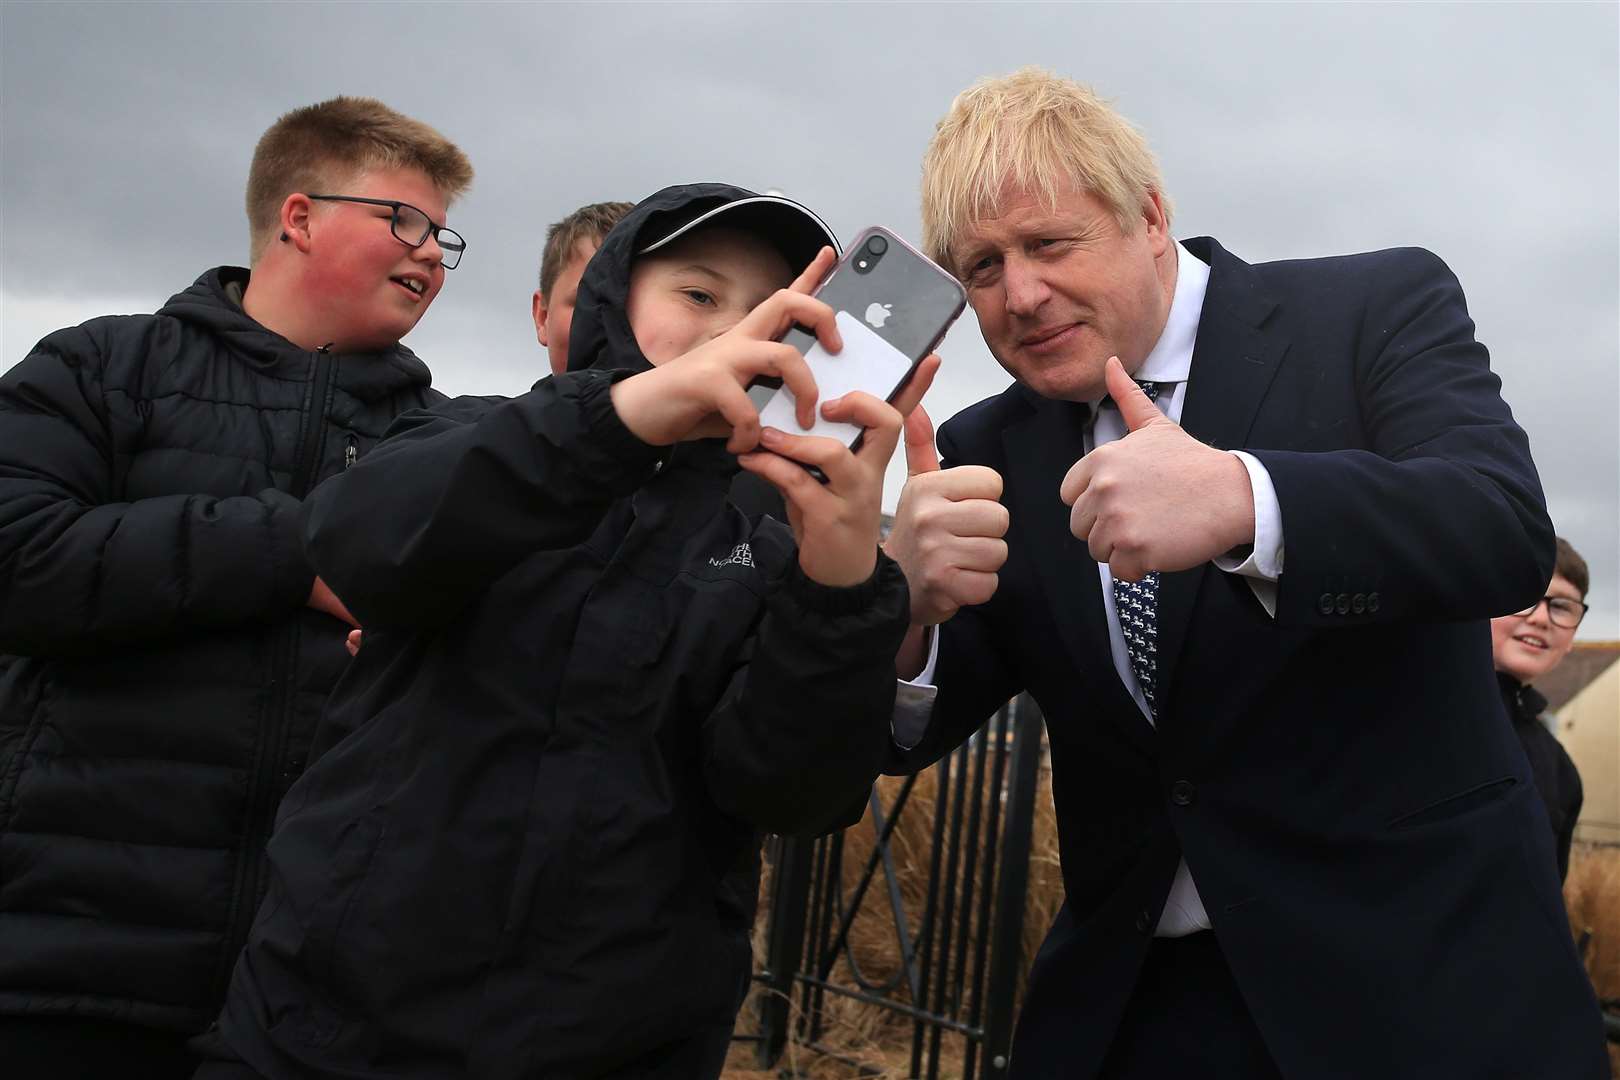 Prime Minister Boris Johnson poses for a selfie as he meets members of the public while campaigning in Hartlepool (PA)